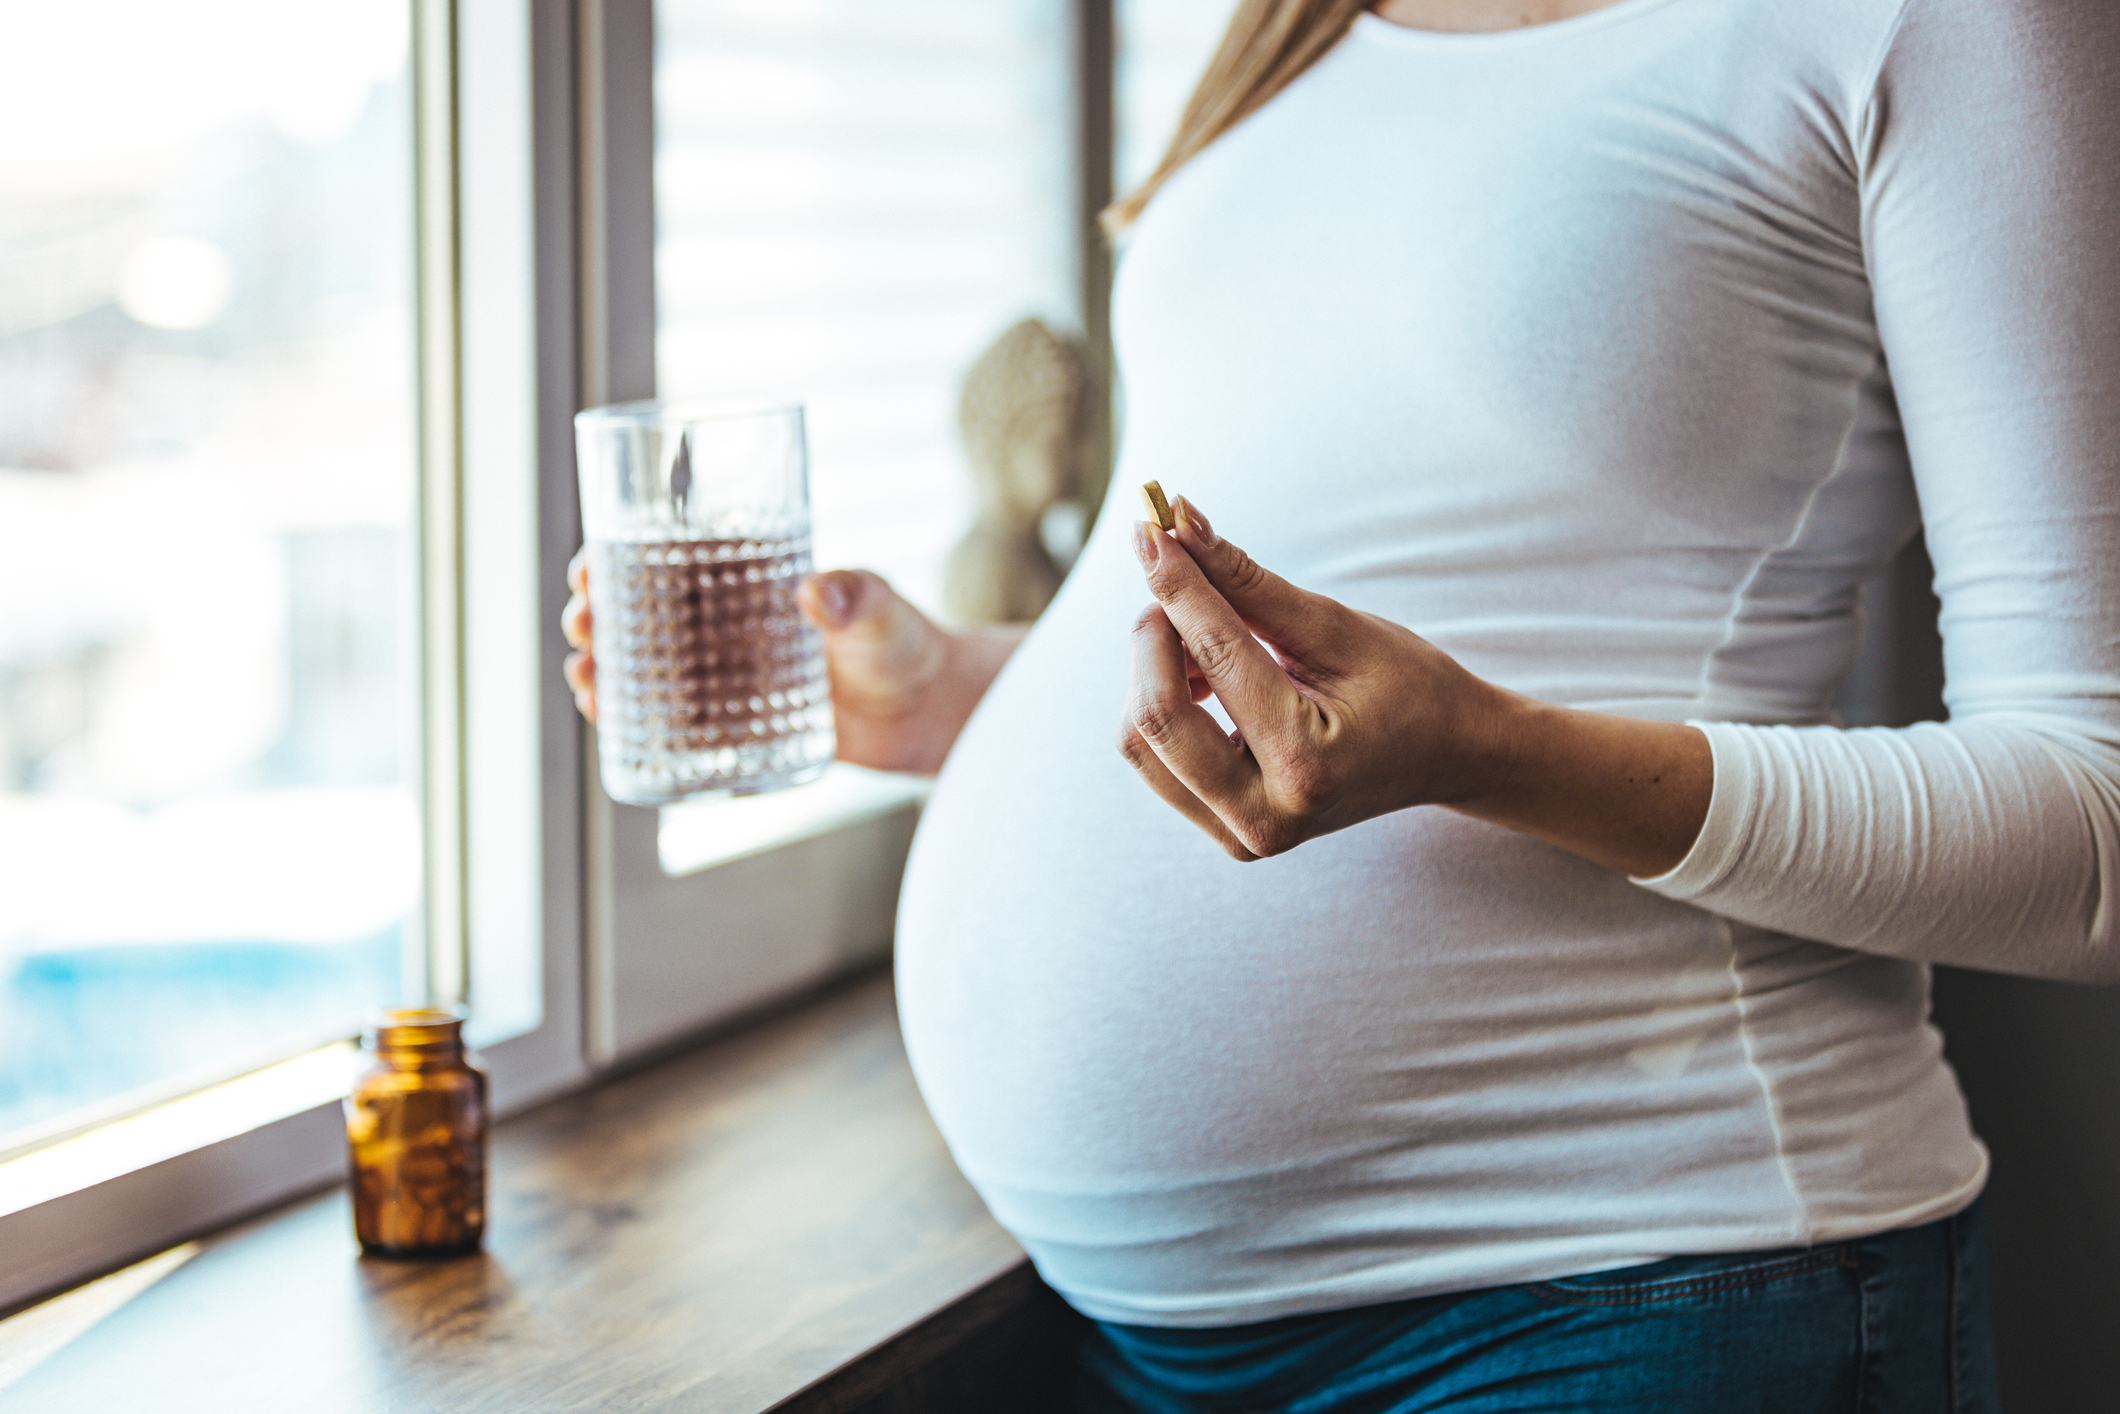 Researchers find vitamins E and B12 influence pregnancy complications